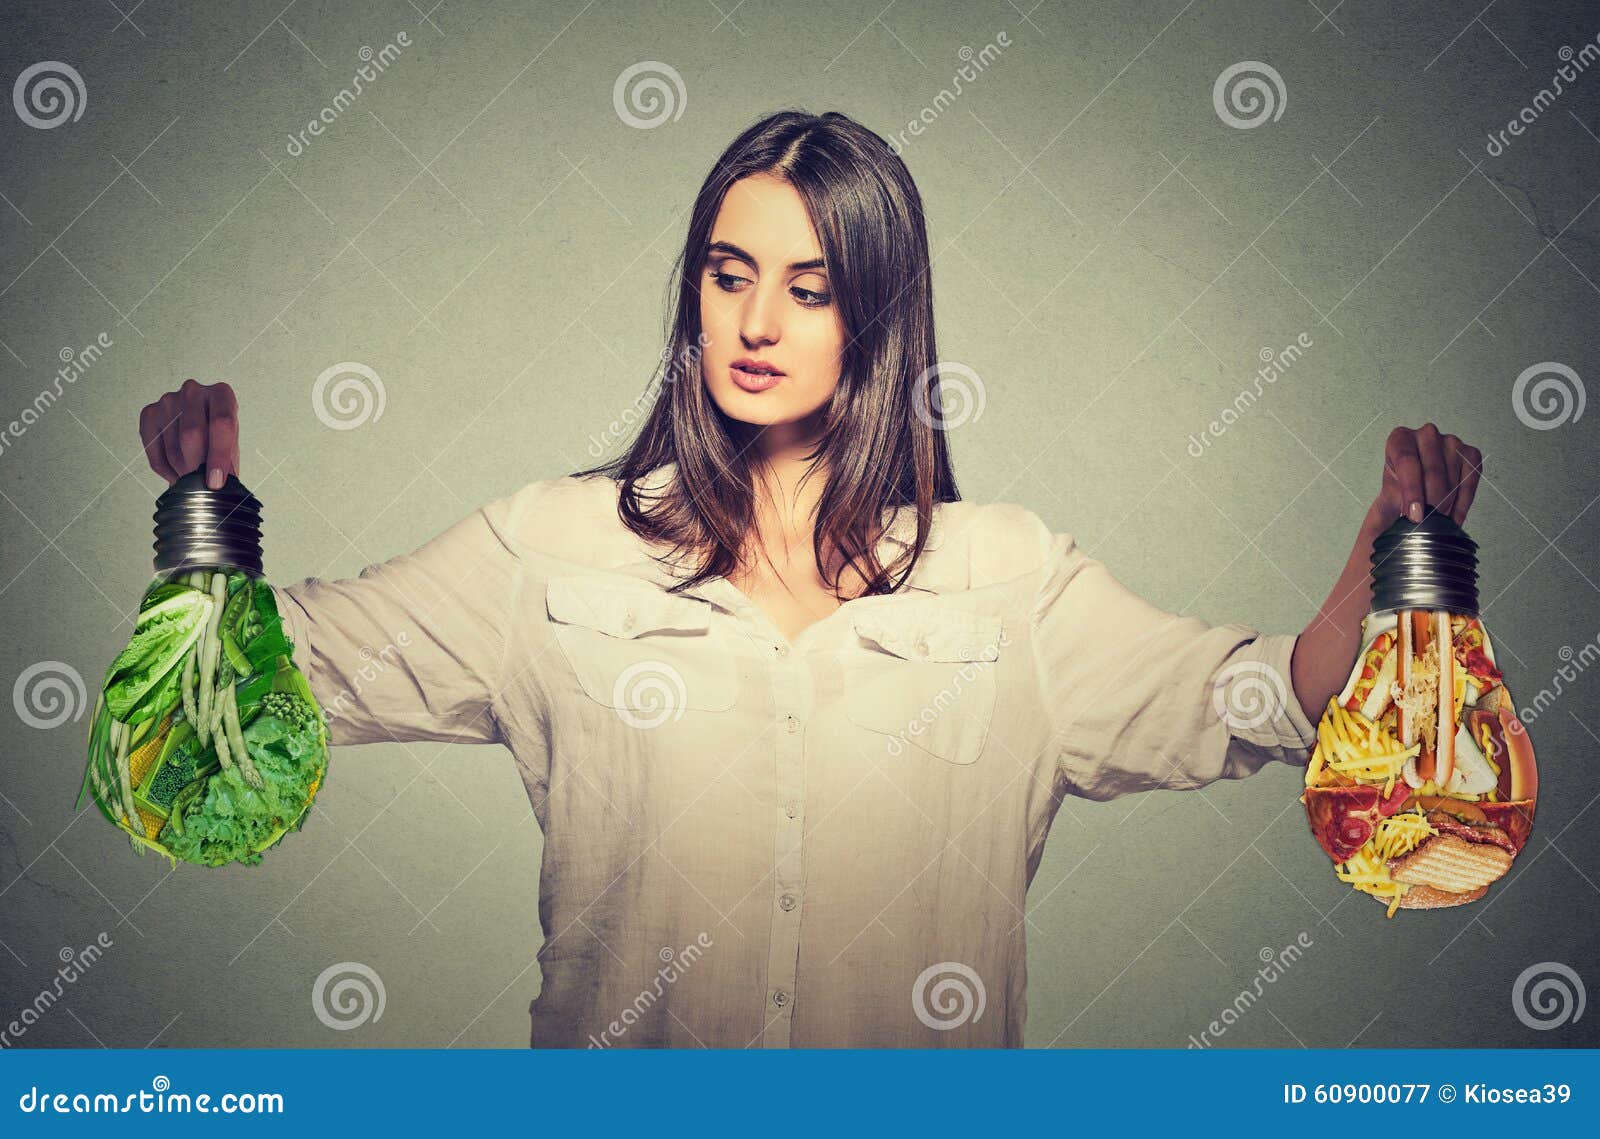 woman thinking making diet choices junk food or green vegetables